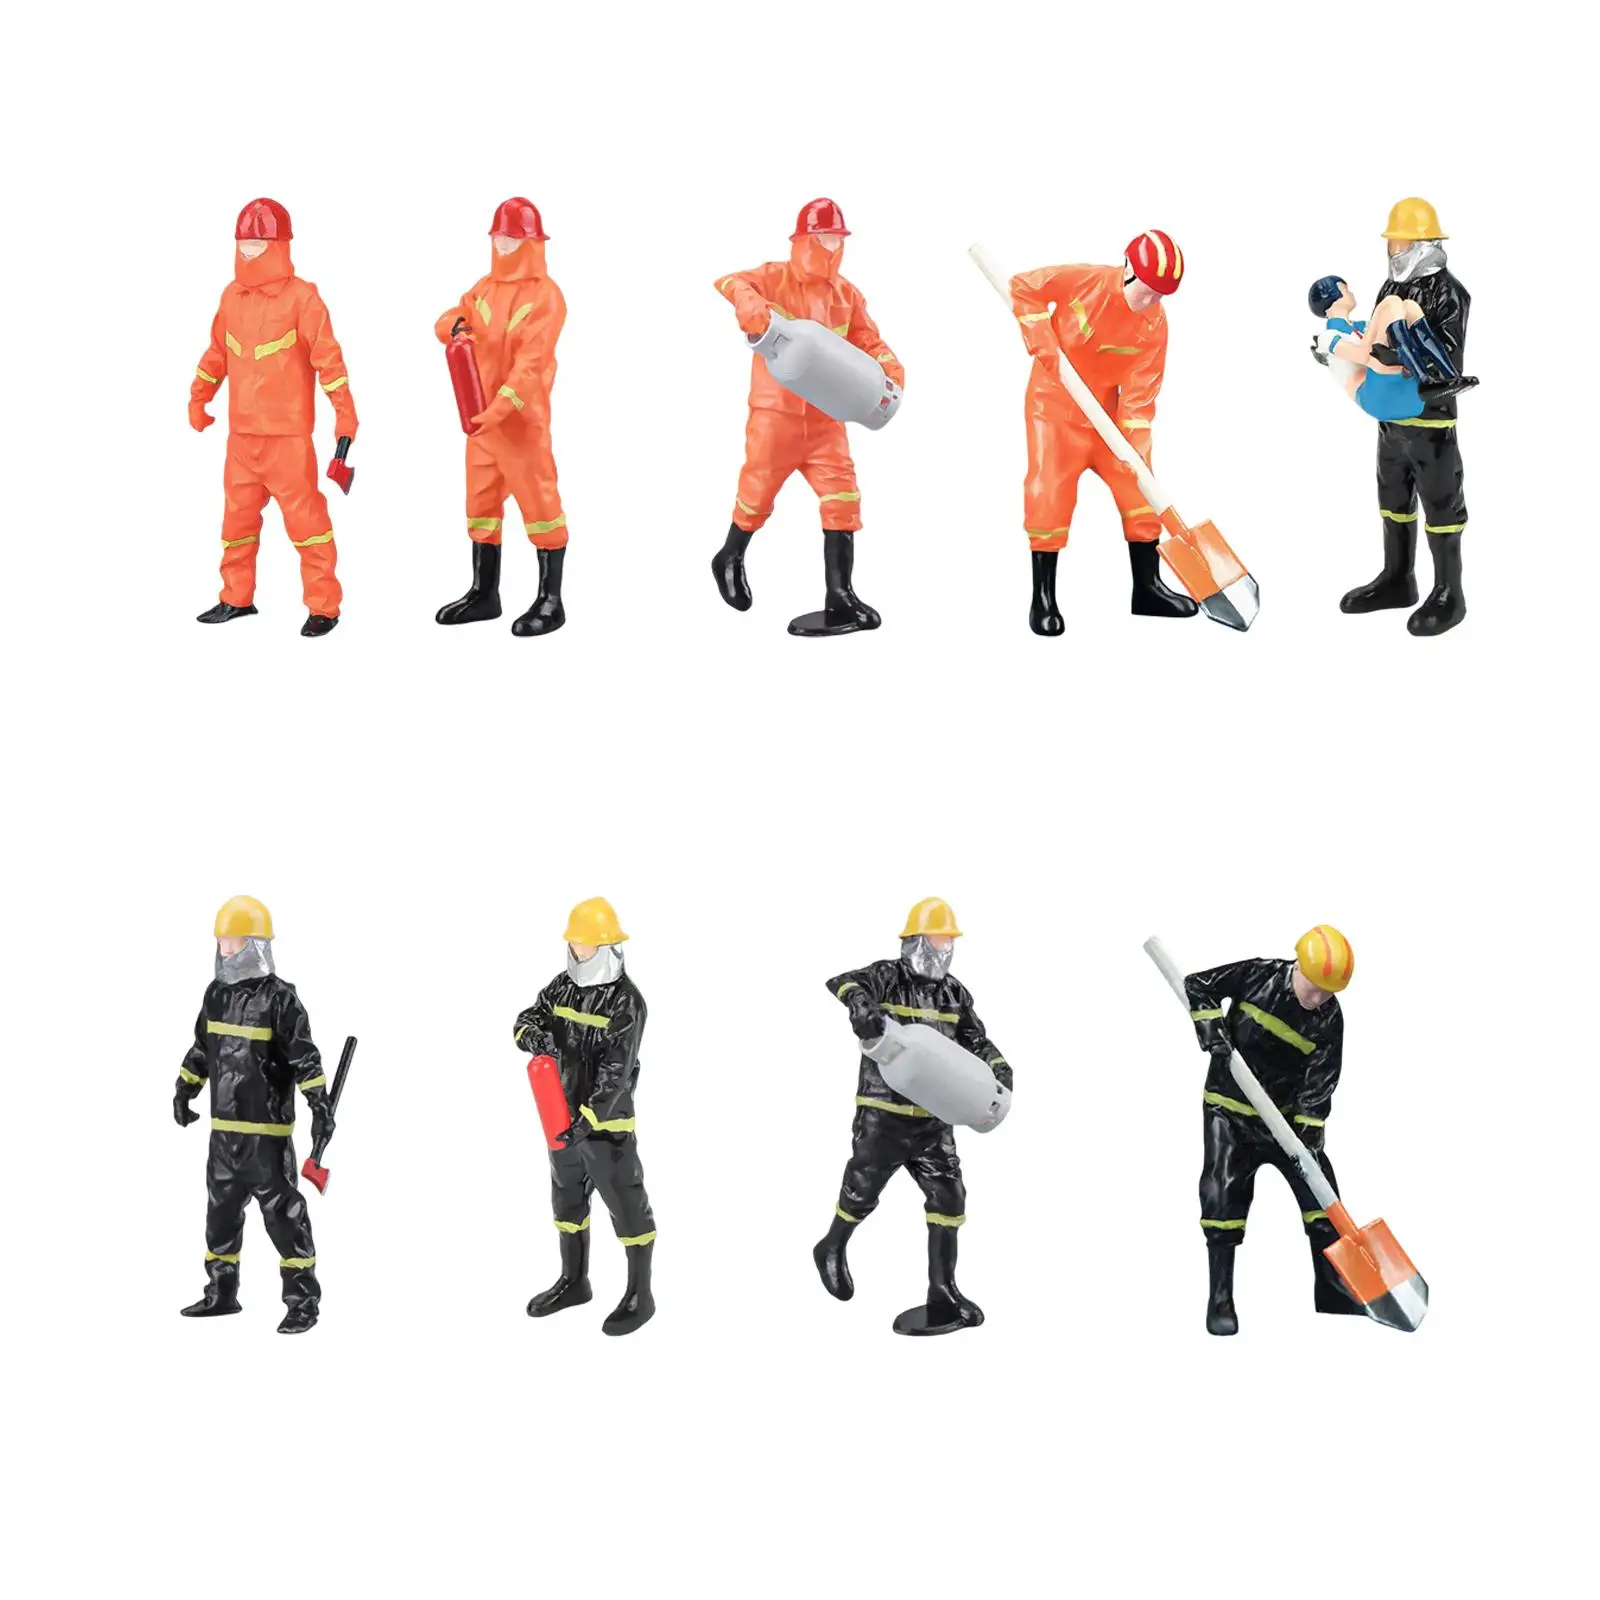 Resin 1/32 Scale Models Figurine Miniature People Model Fireman Figures for Miniature Scene Diorama Photography Props Layout